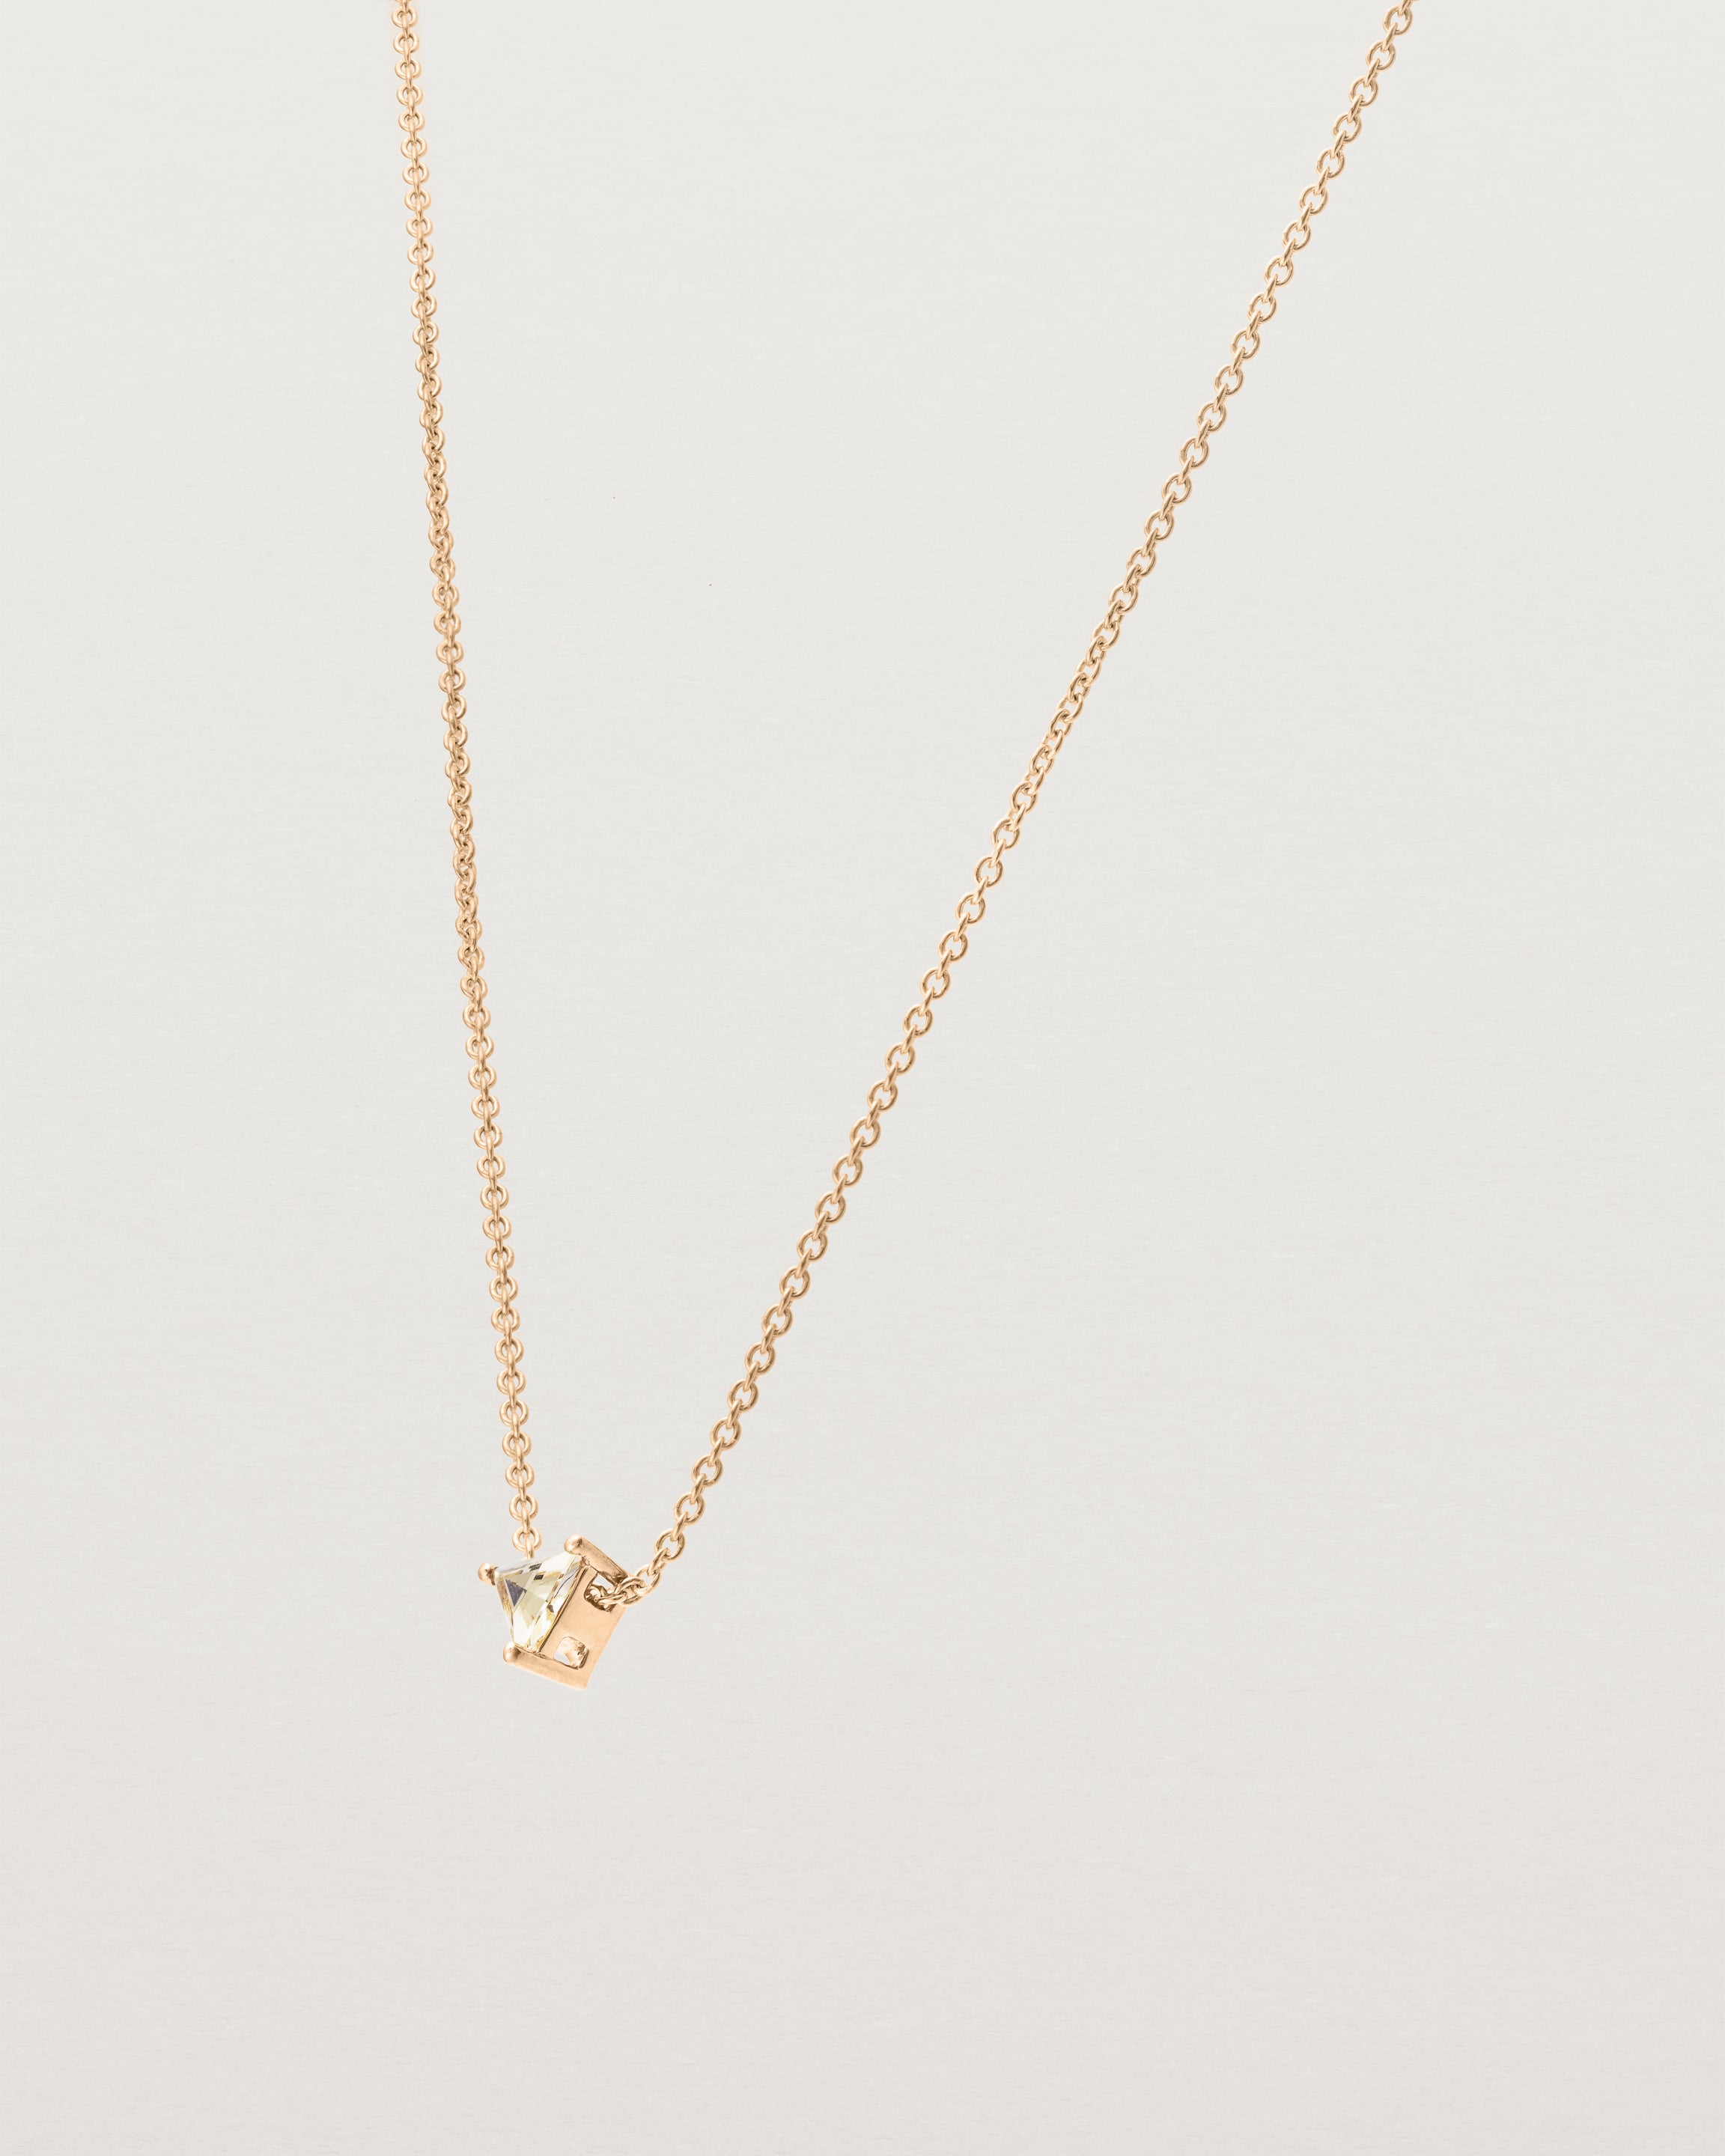 Angled view of the Tiny Trillion Necklace with Heliodor in Rose Gold.